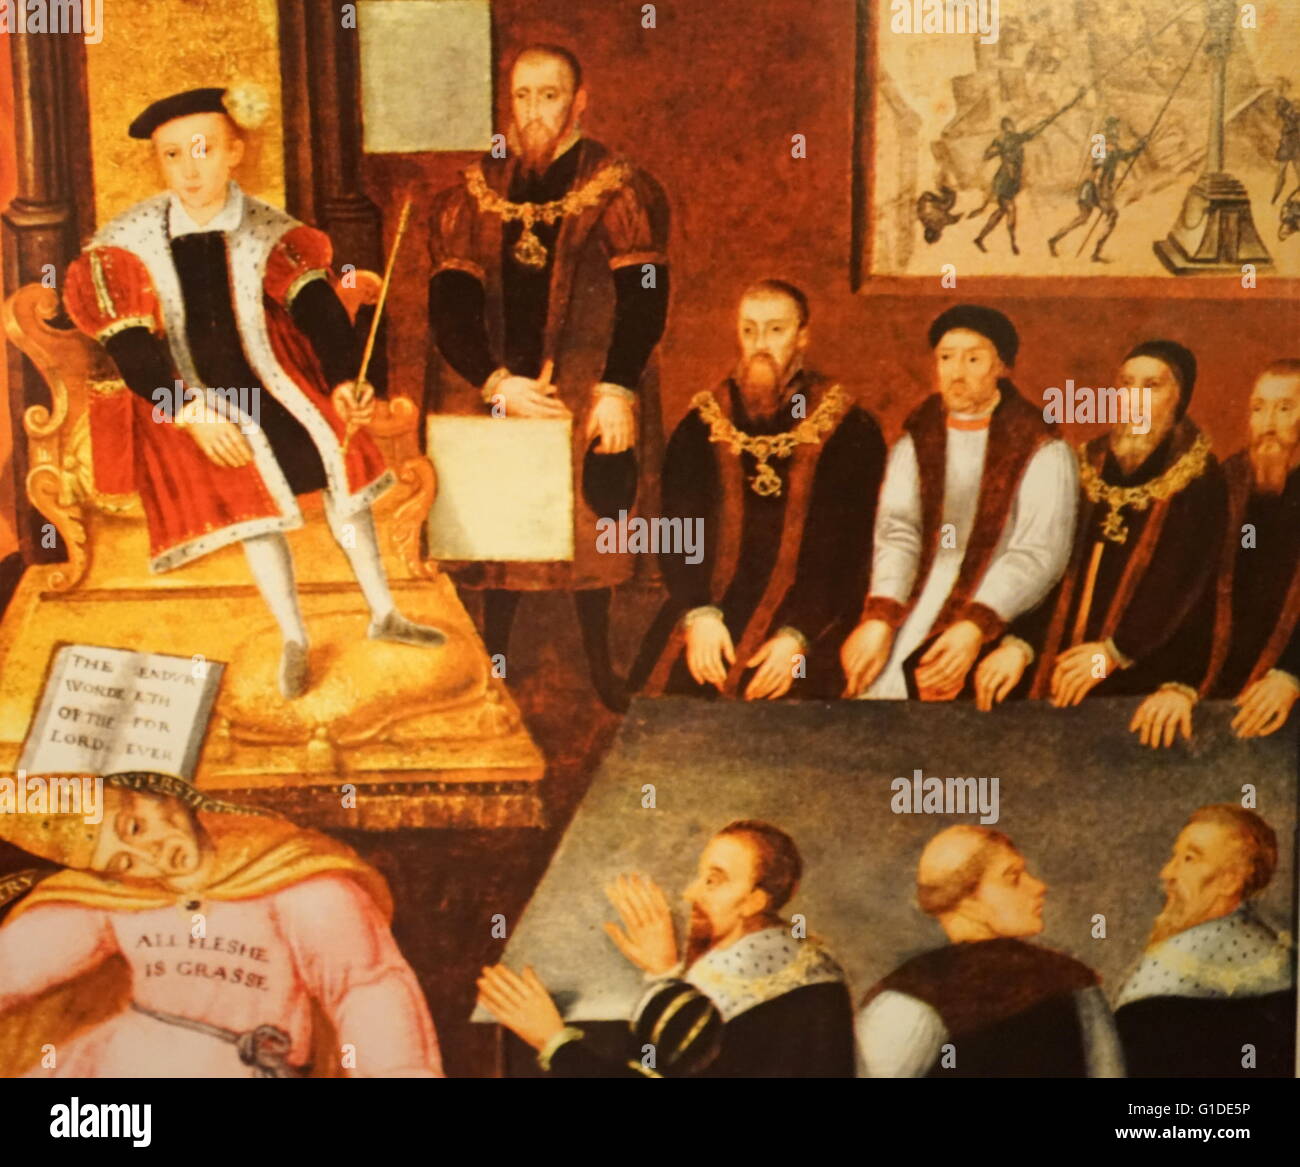 Painting depicting the boy king, Edward VI of England (1537-1553), with his advisors. Dated 16th Century Stock Photo